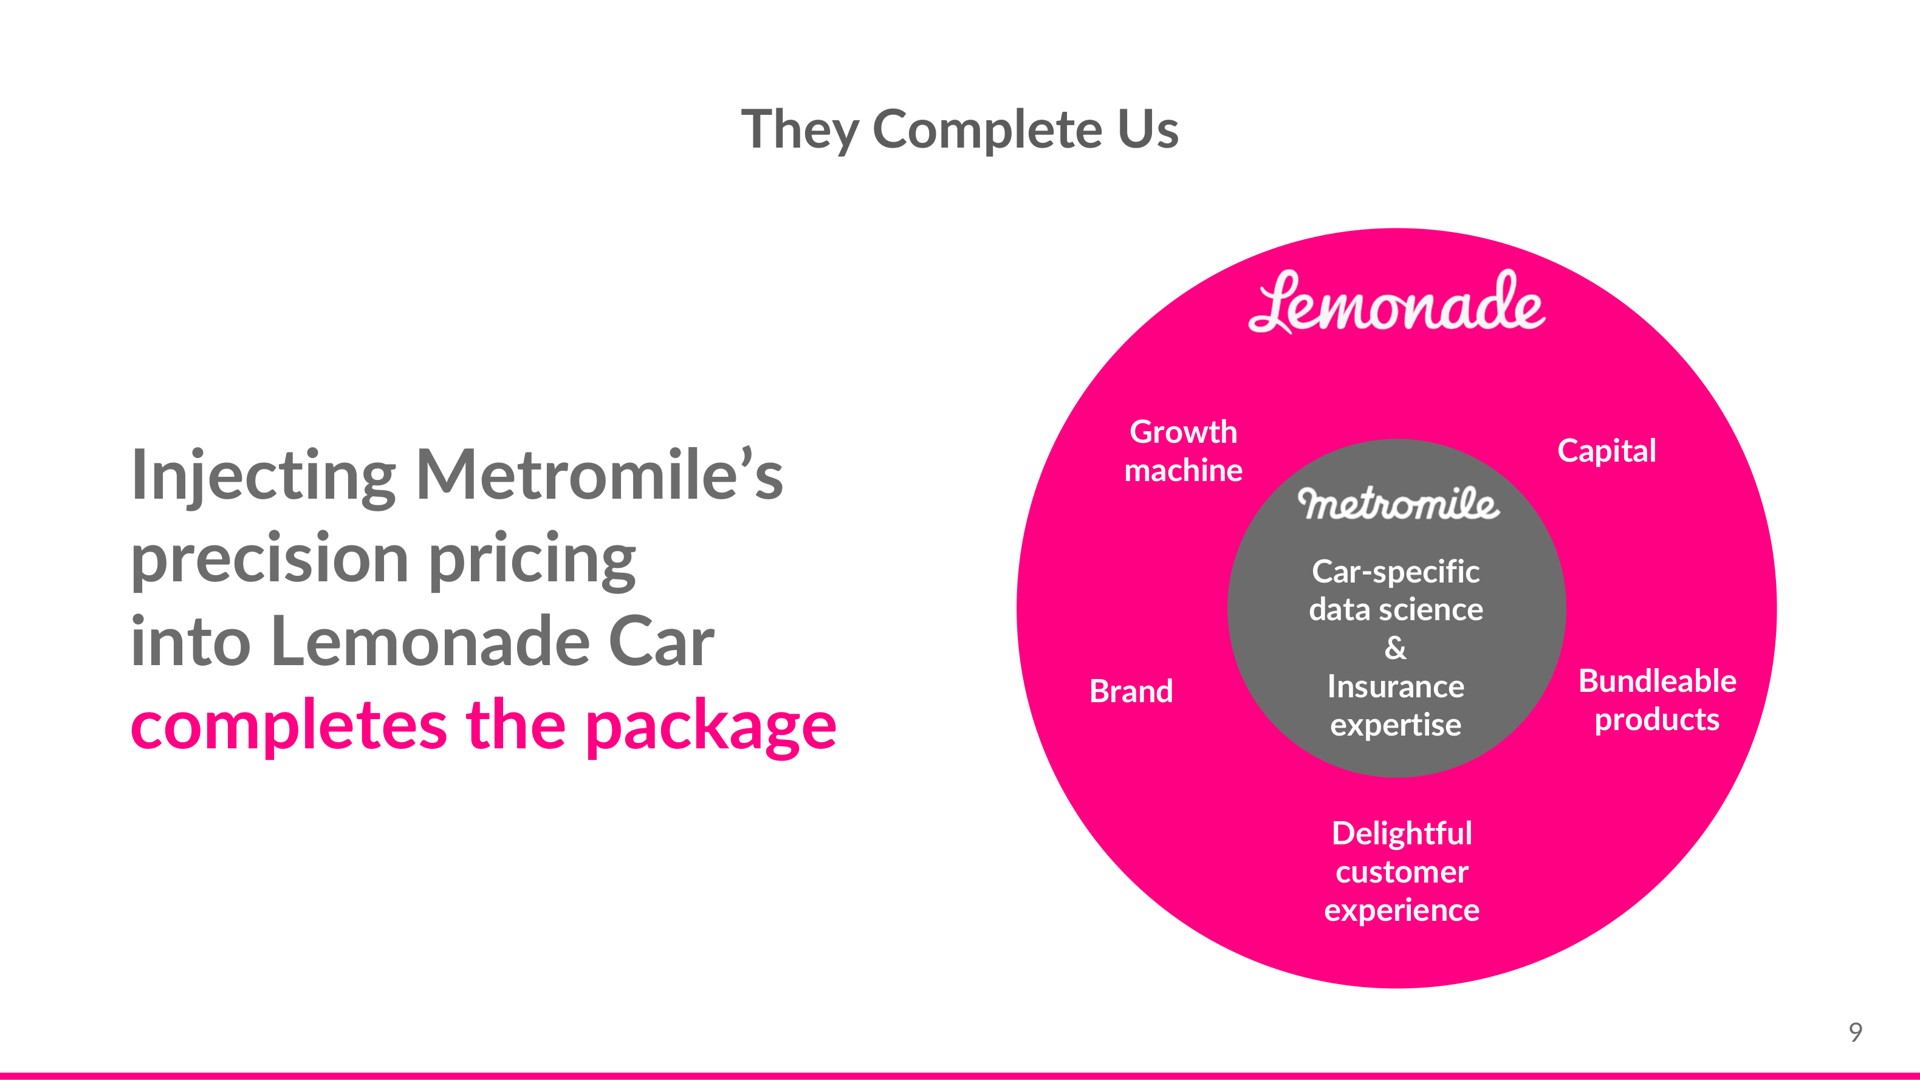 they complete us injecting precision pricing into lemonade car completes the package | Lemonade